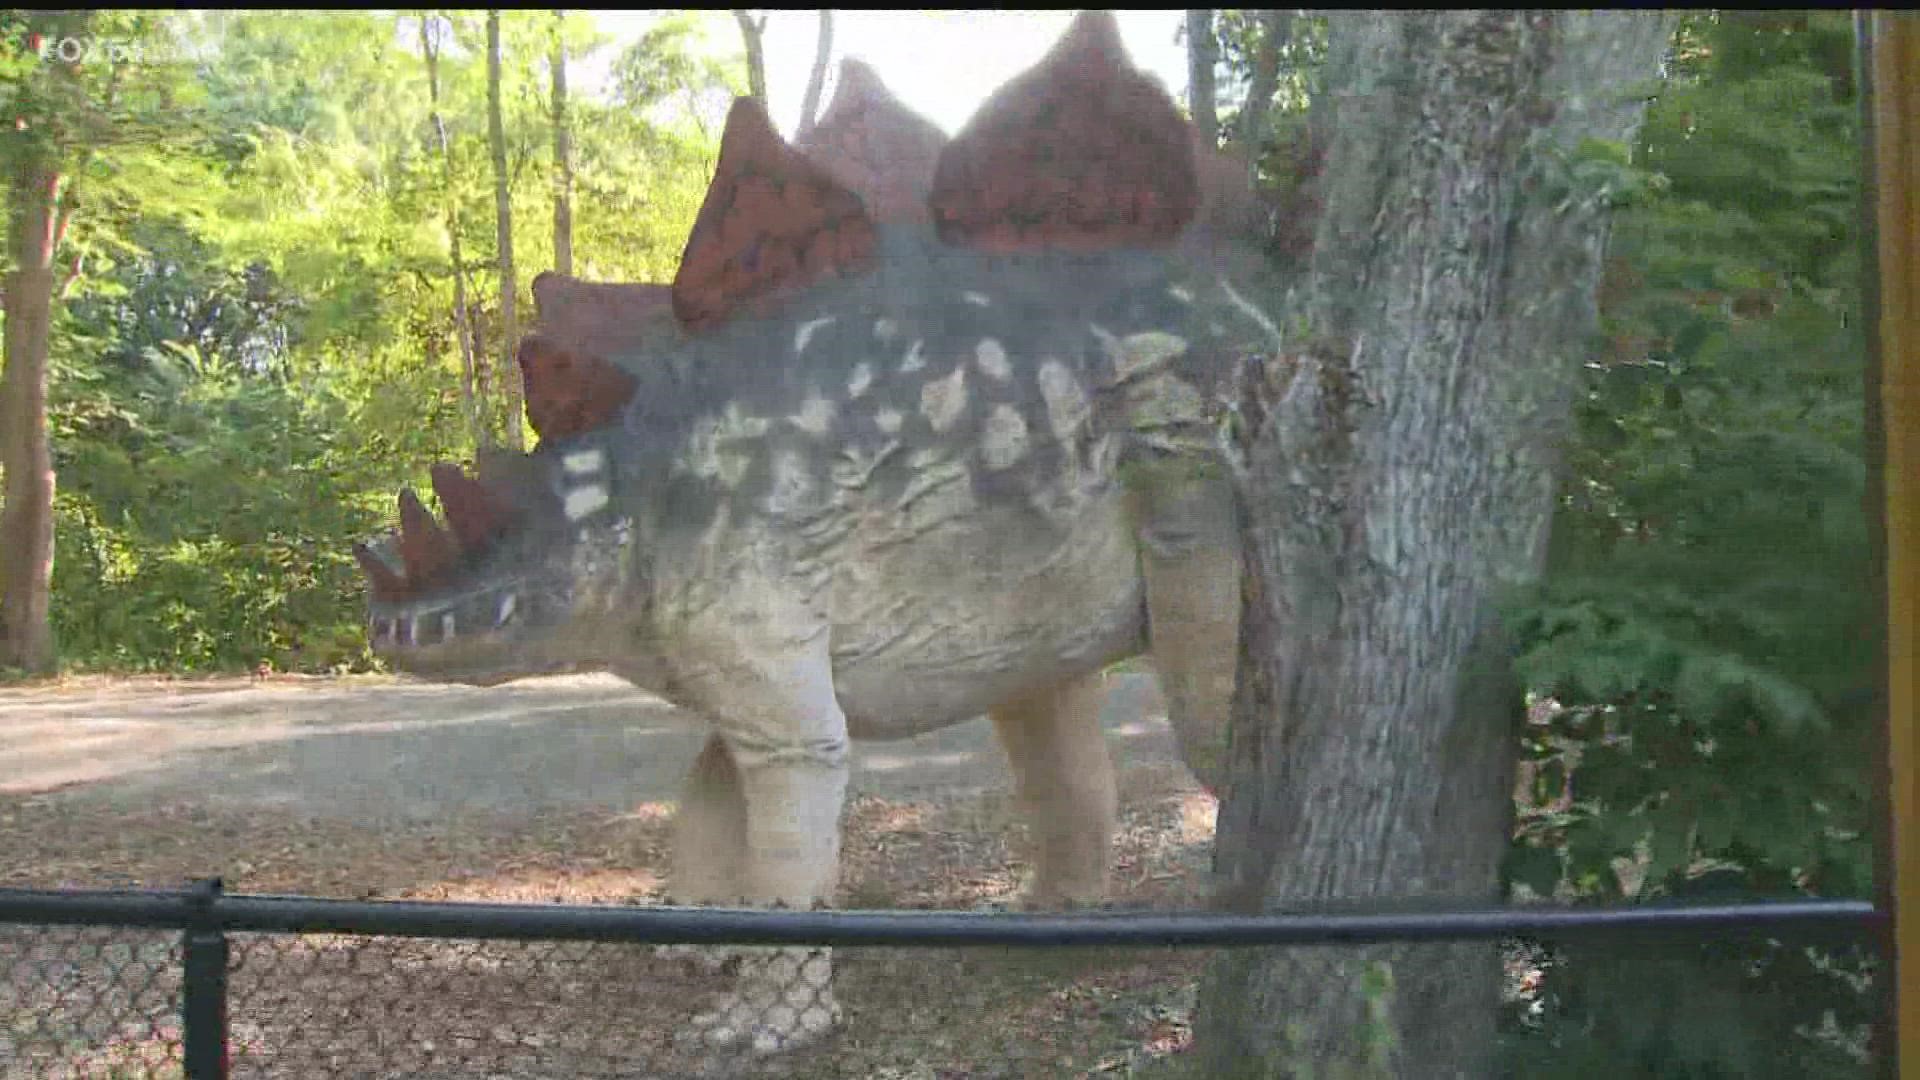 Are you looking to hang out with some prehistoric guests? Well, the Dinosaur Place in Montville is the perfect place.